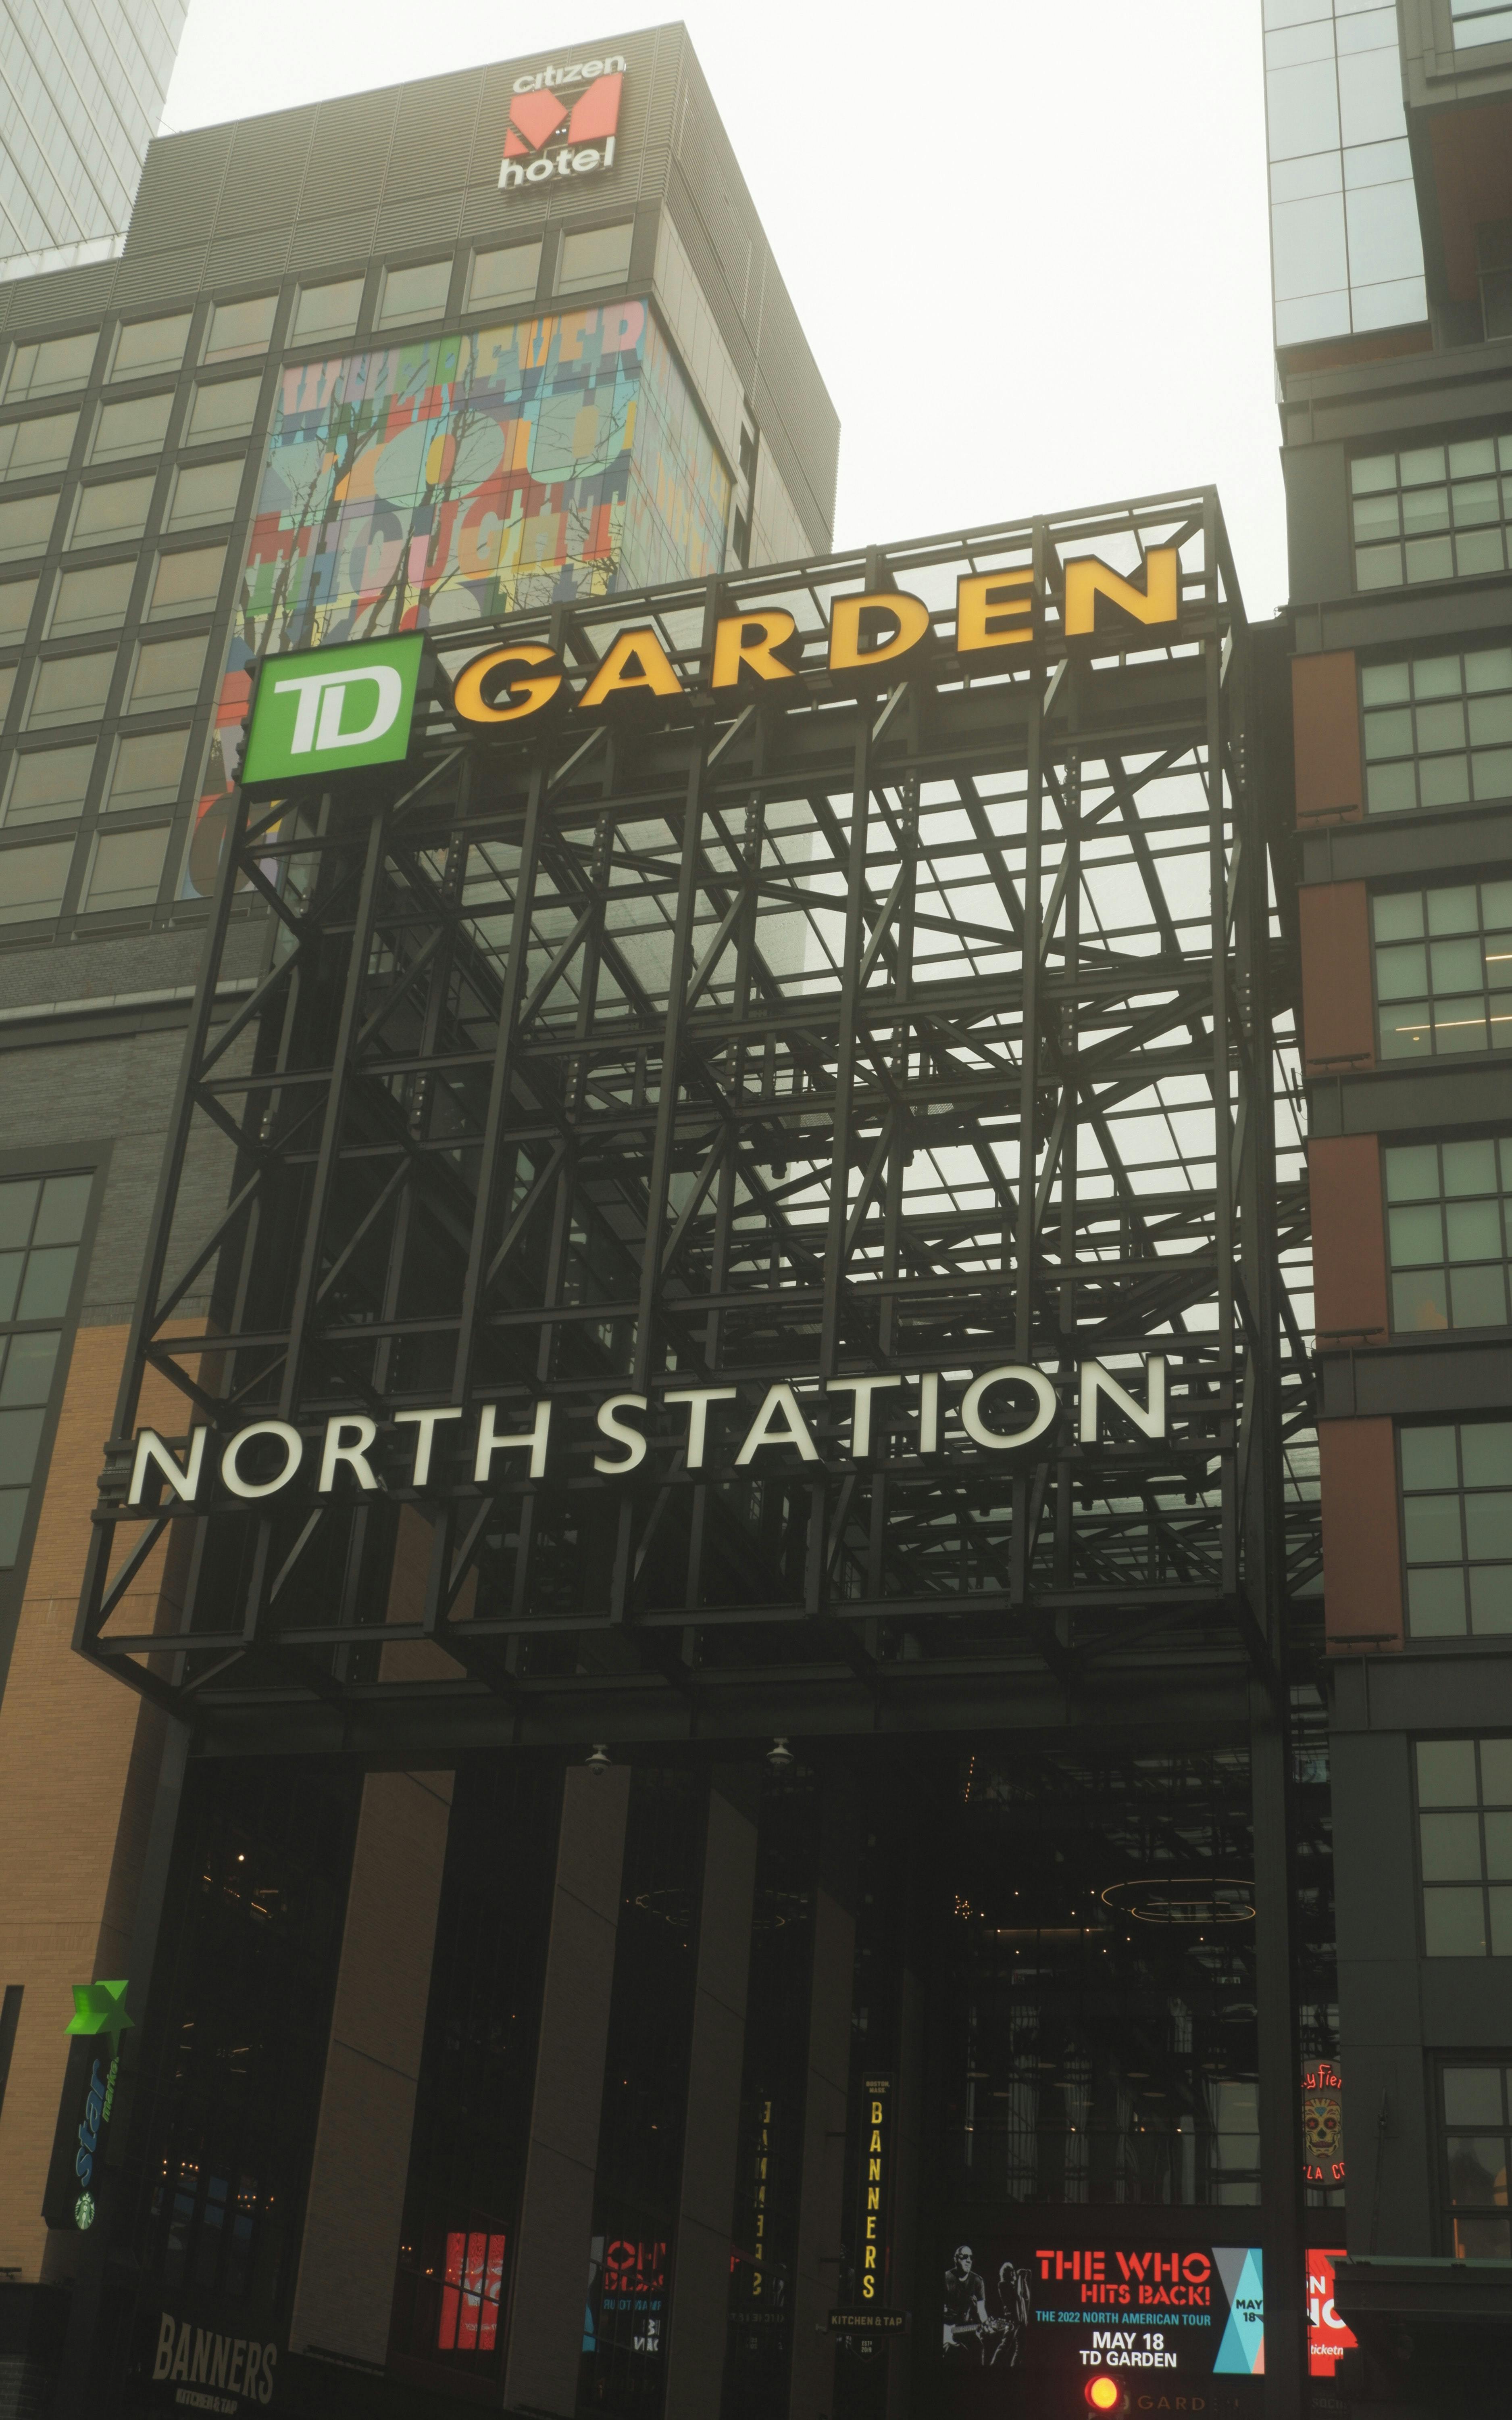 Tagged with TD Garden